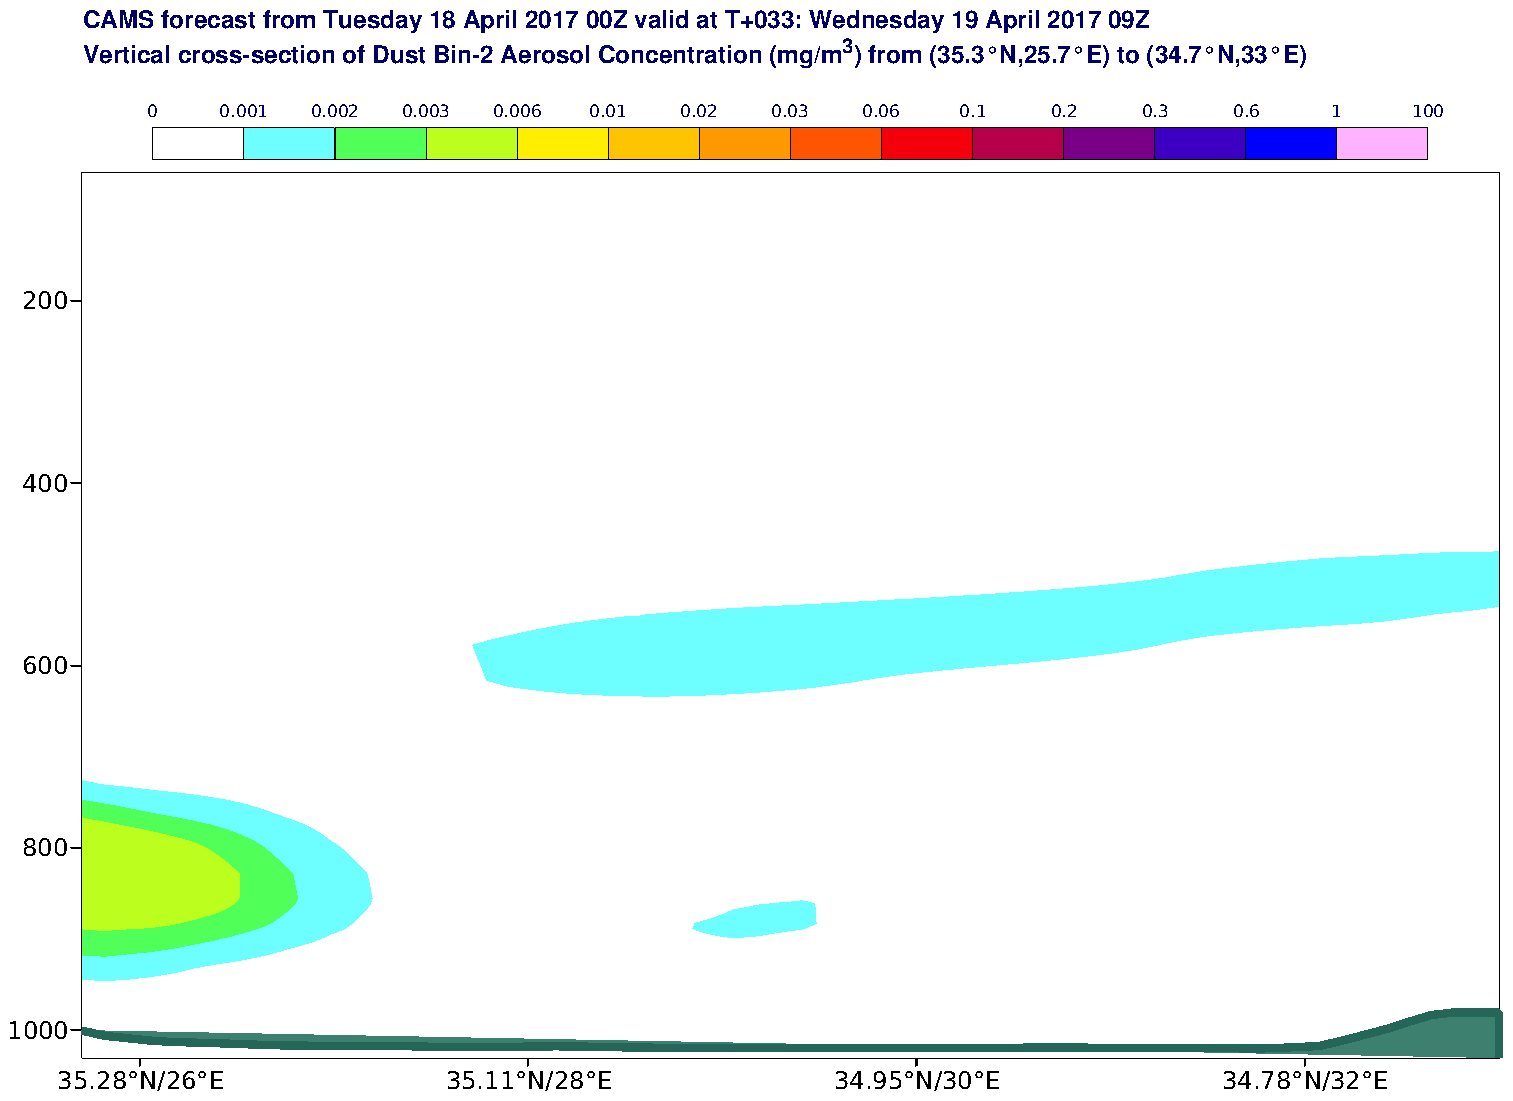 Vertical cross-section of Dust Bin-2 Aerosol Concentration (mg/m3) valid at T33 - 2017-04-19 09:00